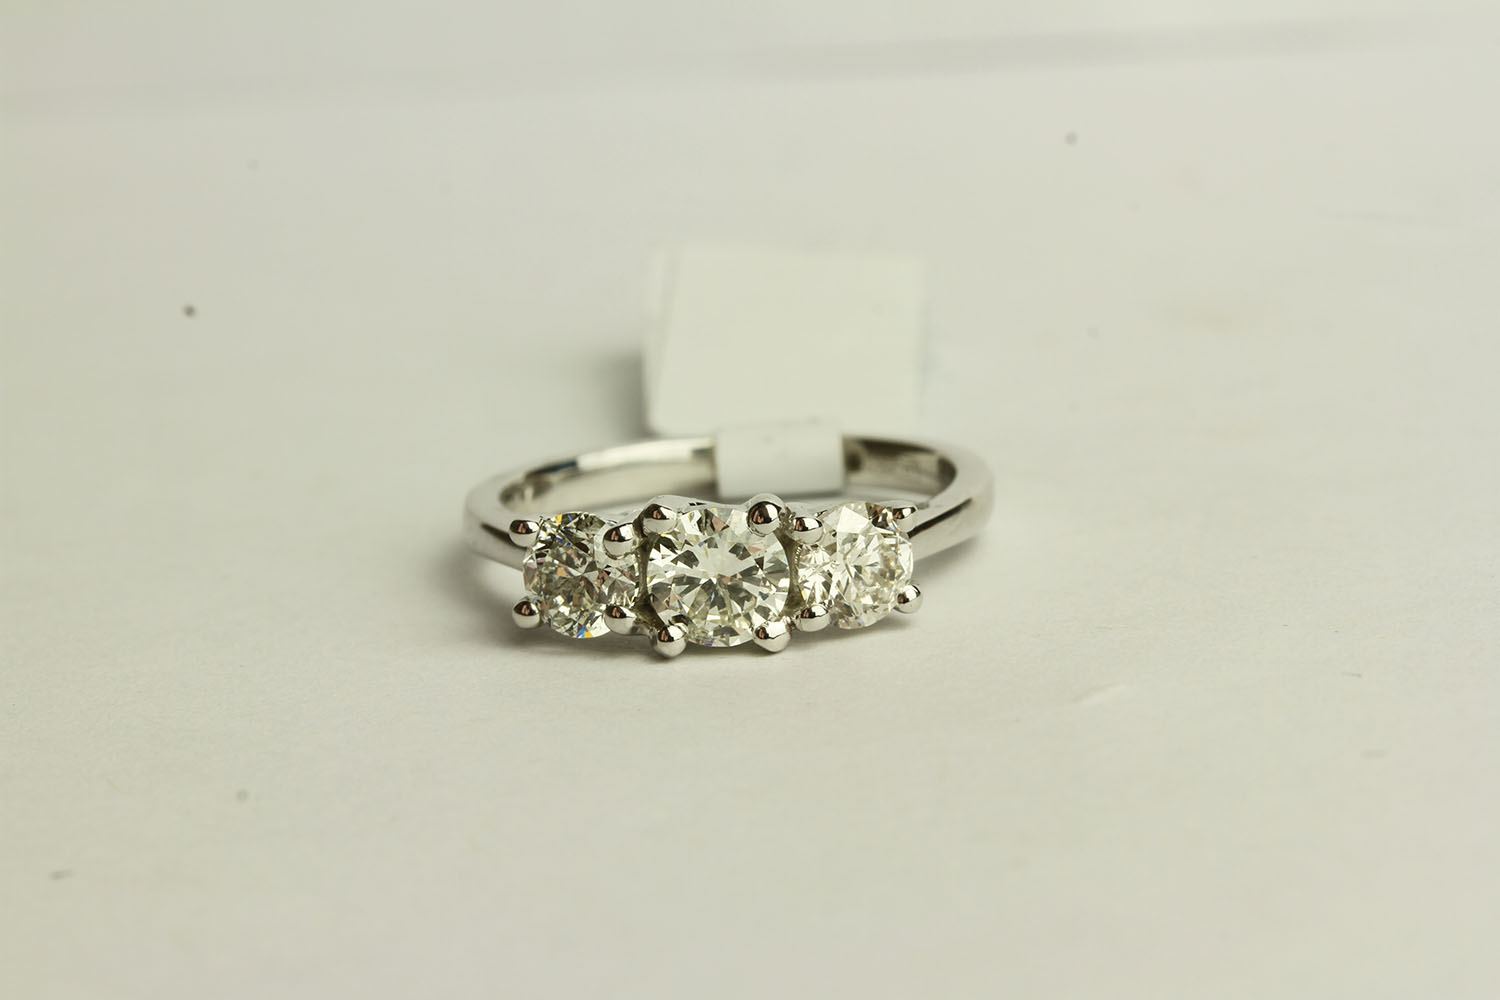 Diamond Trilogy Ring, set with 3 round brilliant cut diamonds totalling approximately 1.52ct